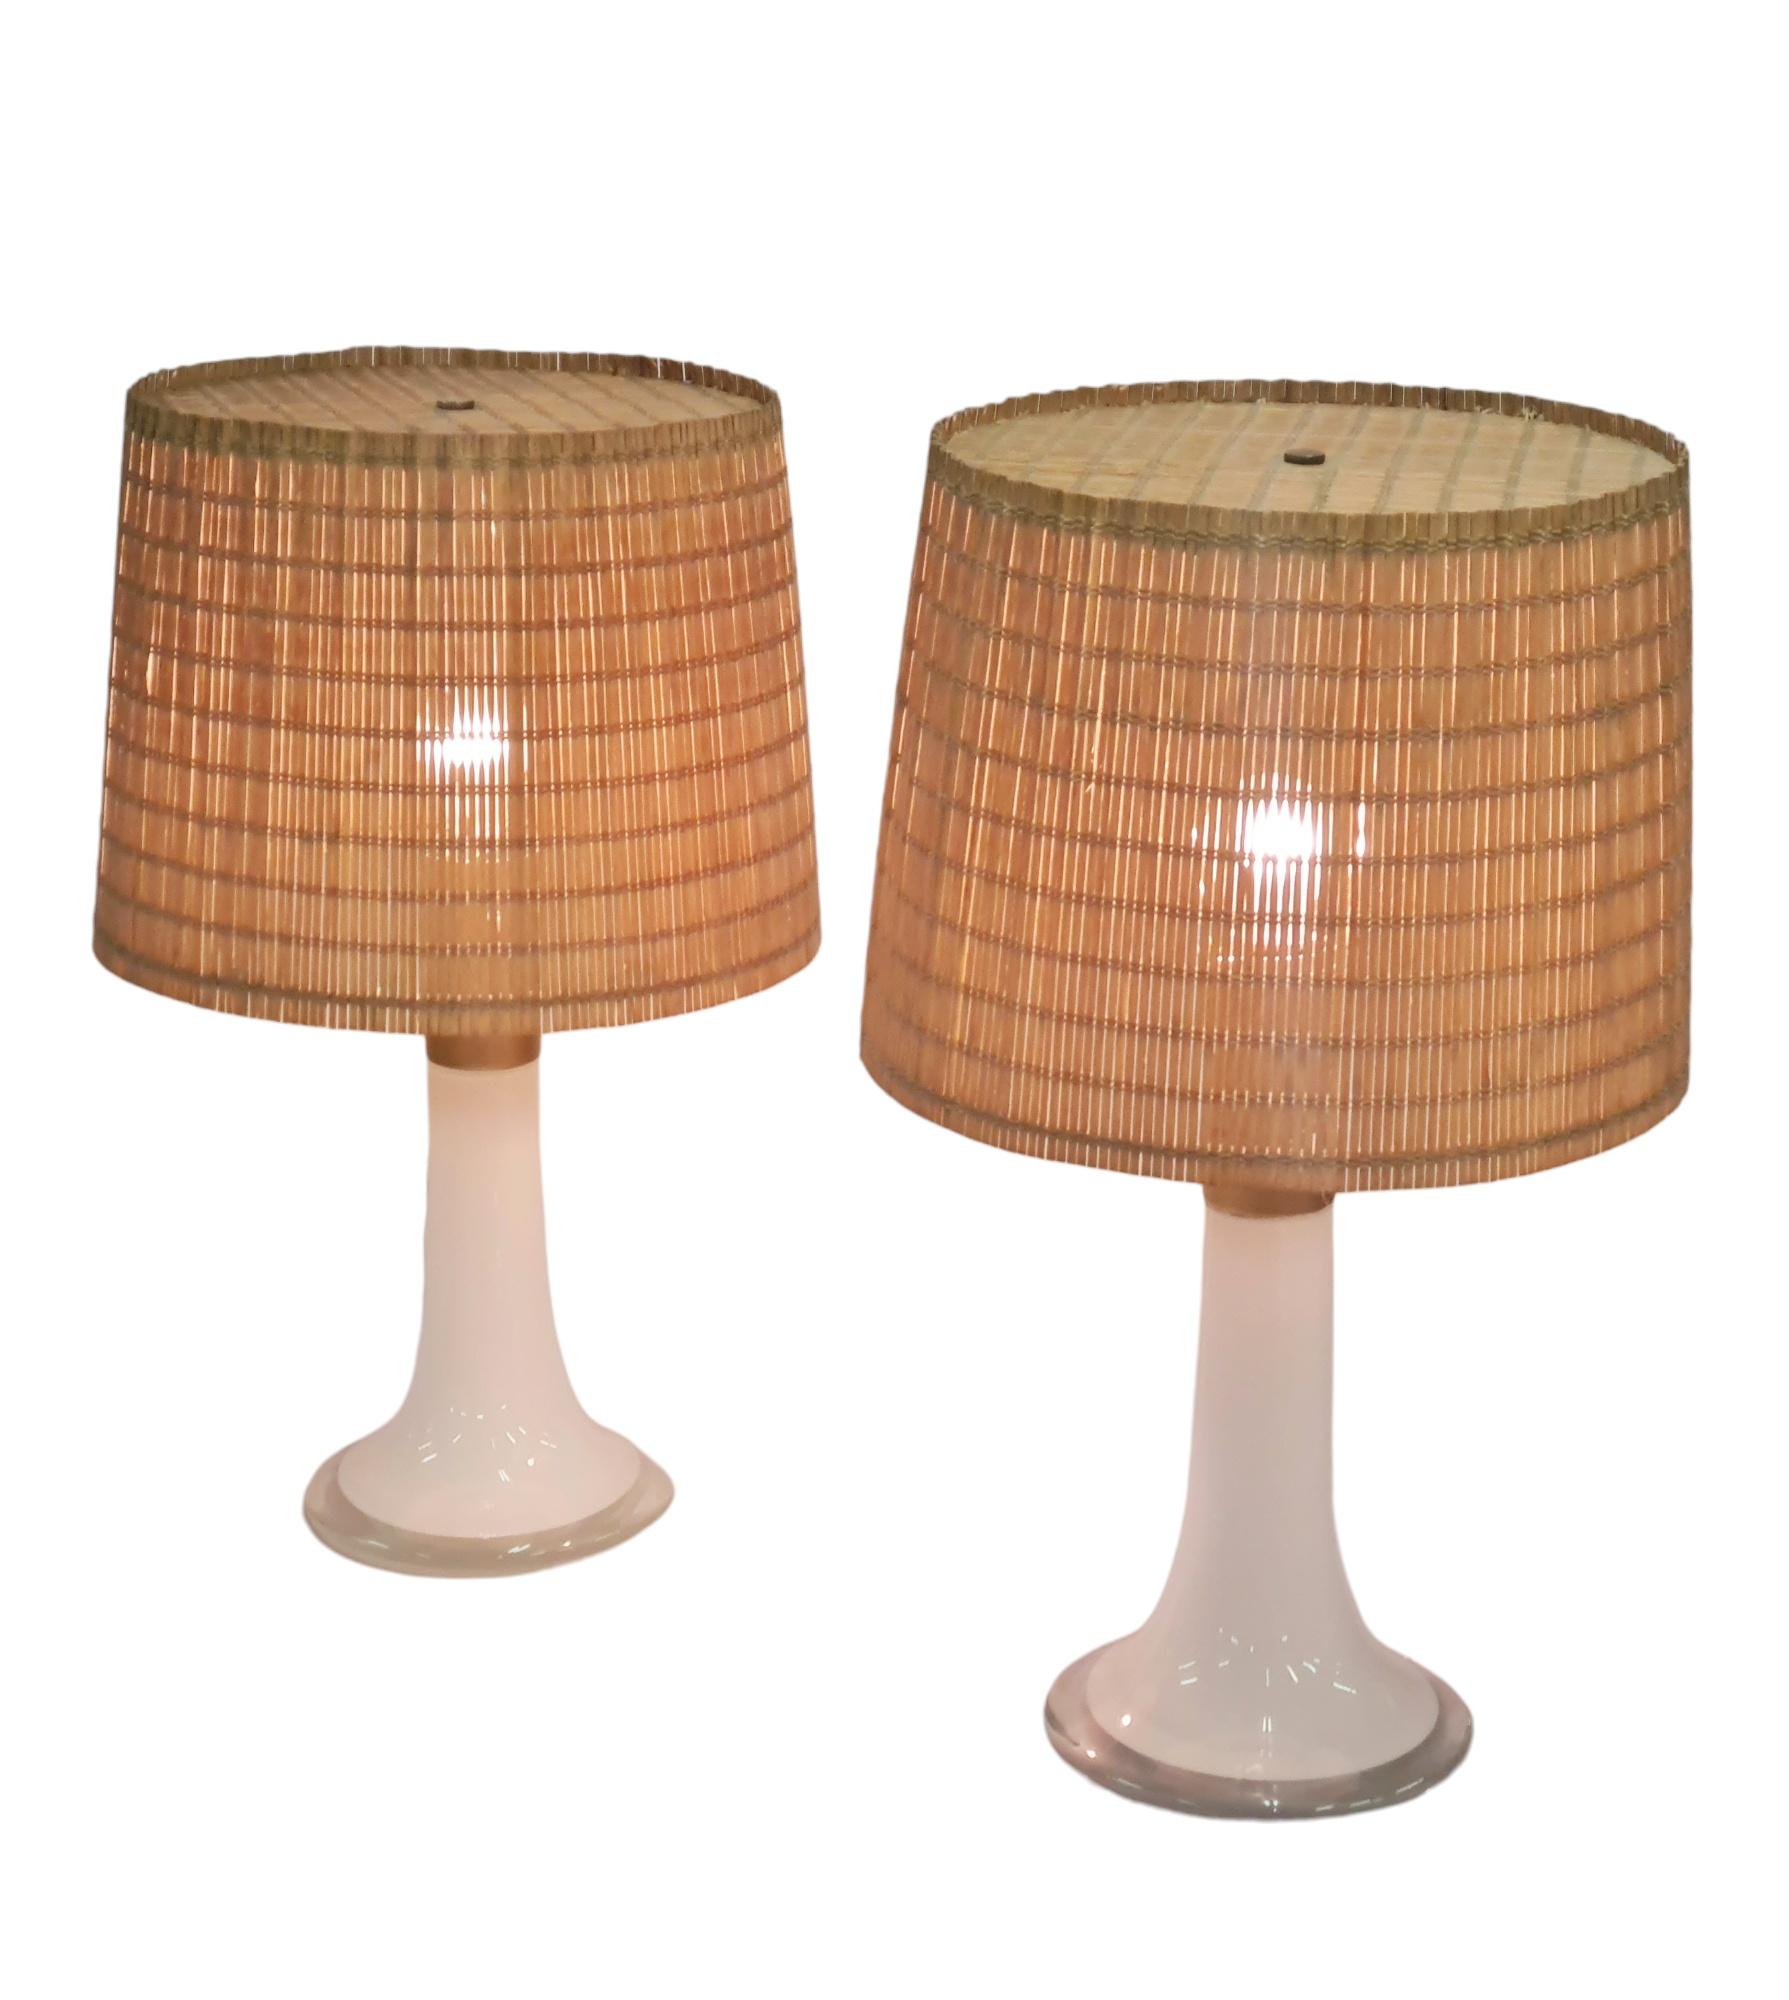 Lisa Johansson Pape Pair of Table Lamps Model 46-017, Orno 1960s For Sale 6